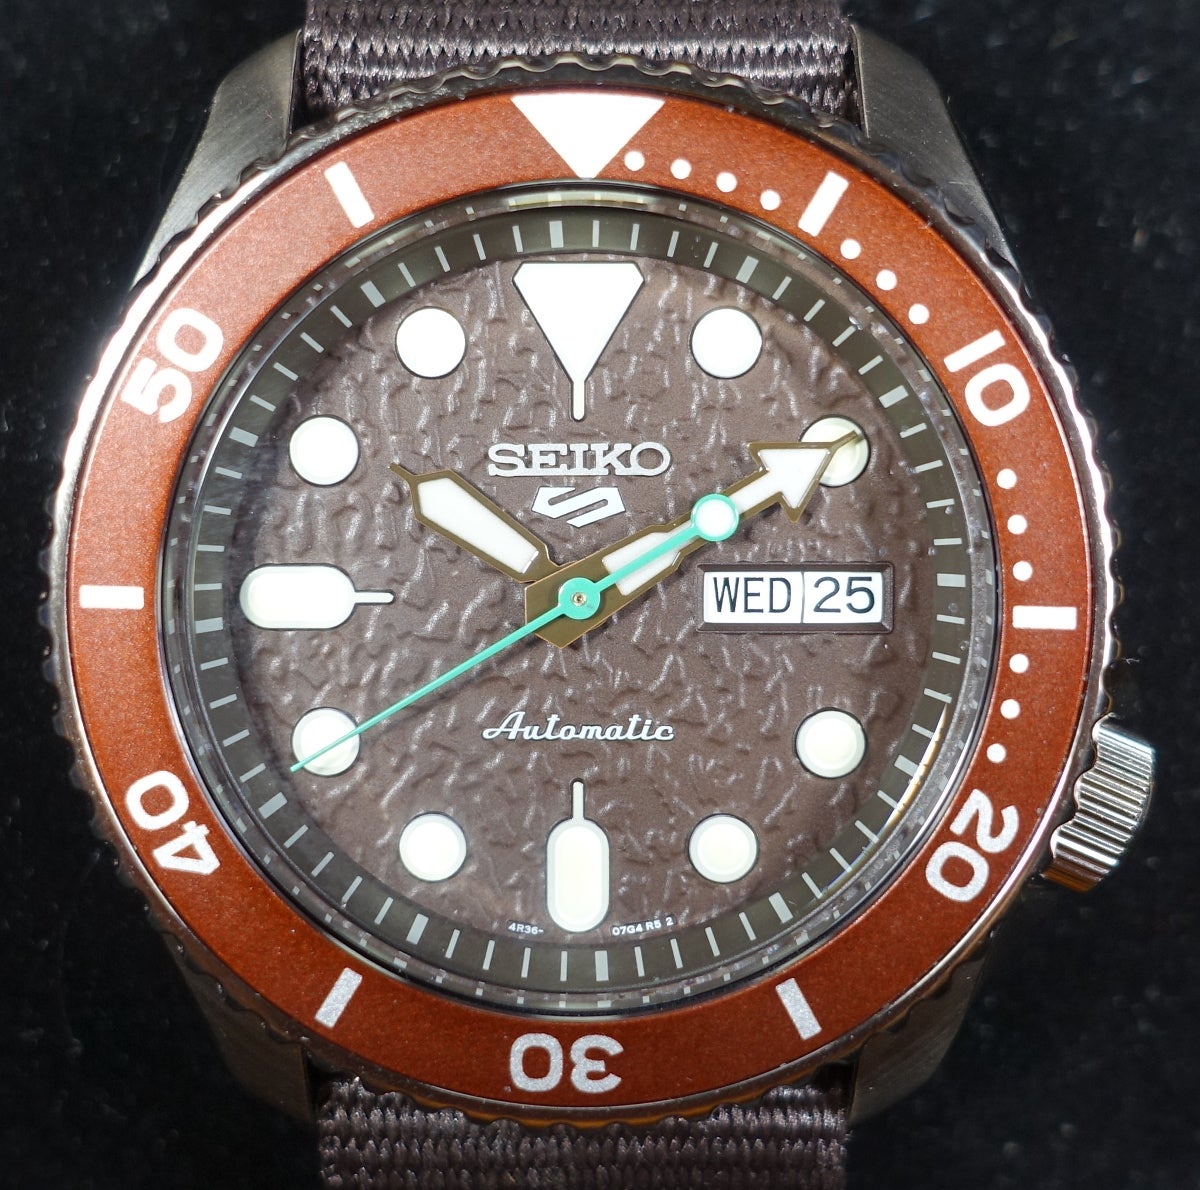 Seiko Quality Control - what's it all about? | WatchUSeek Watch Forums